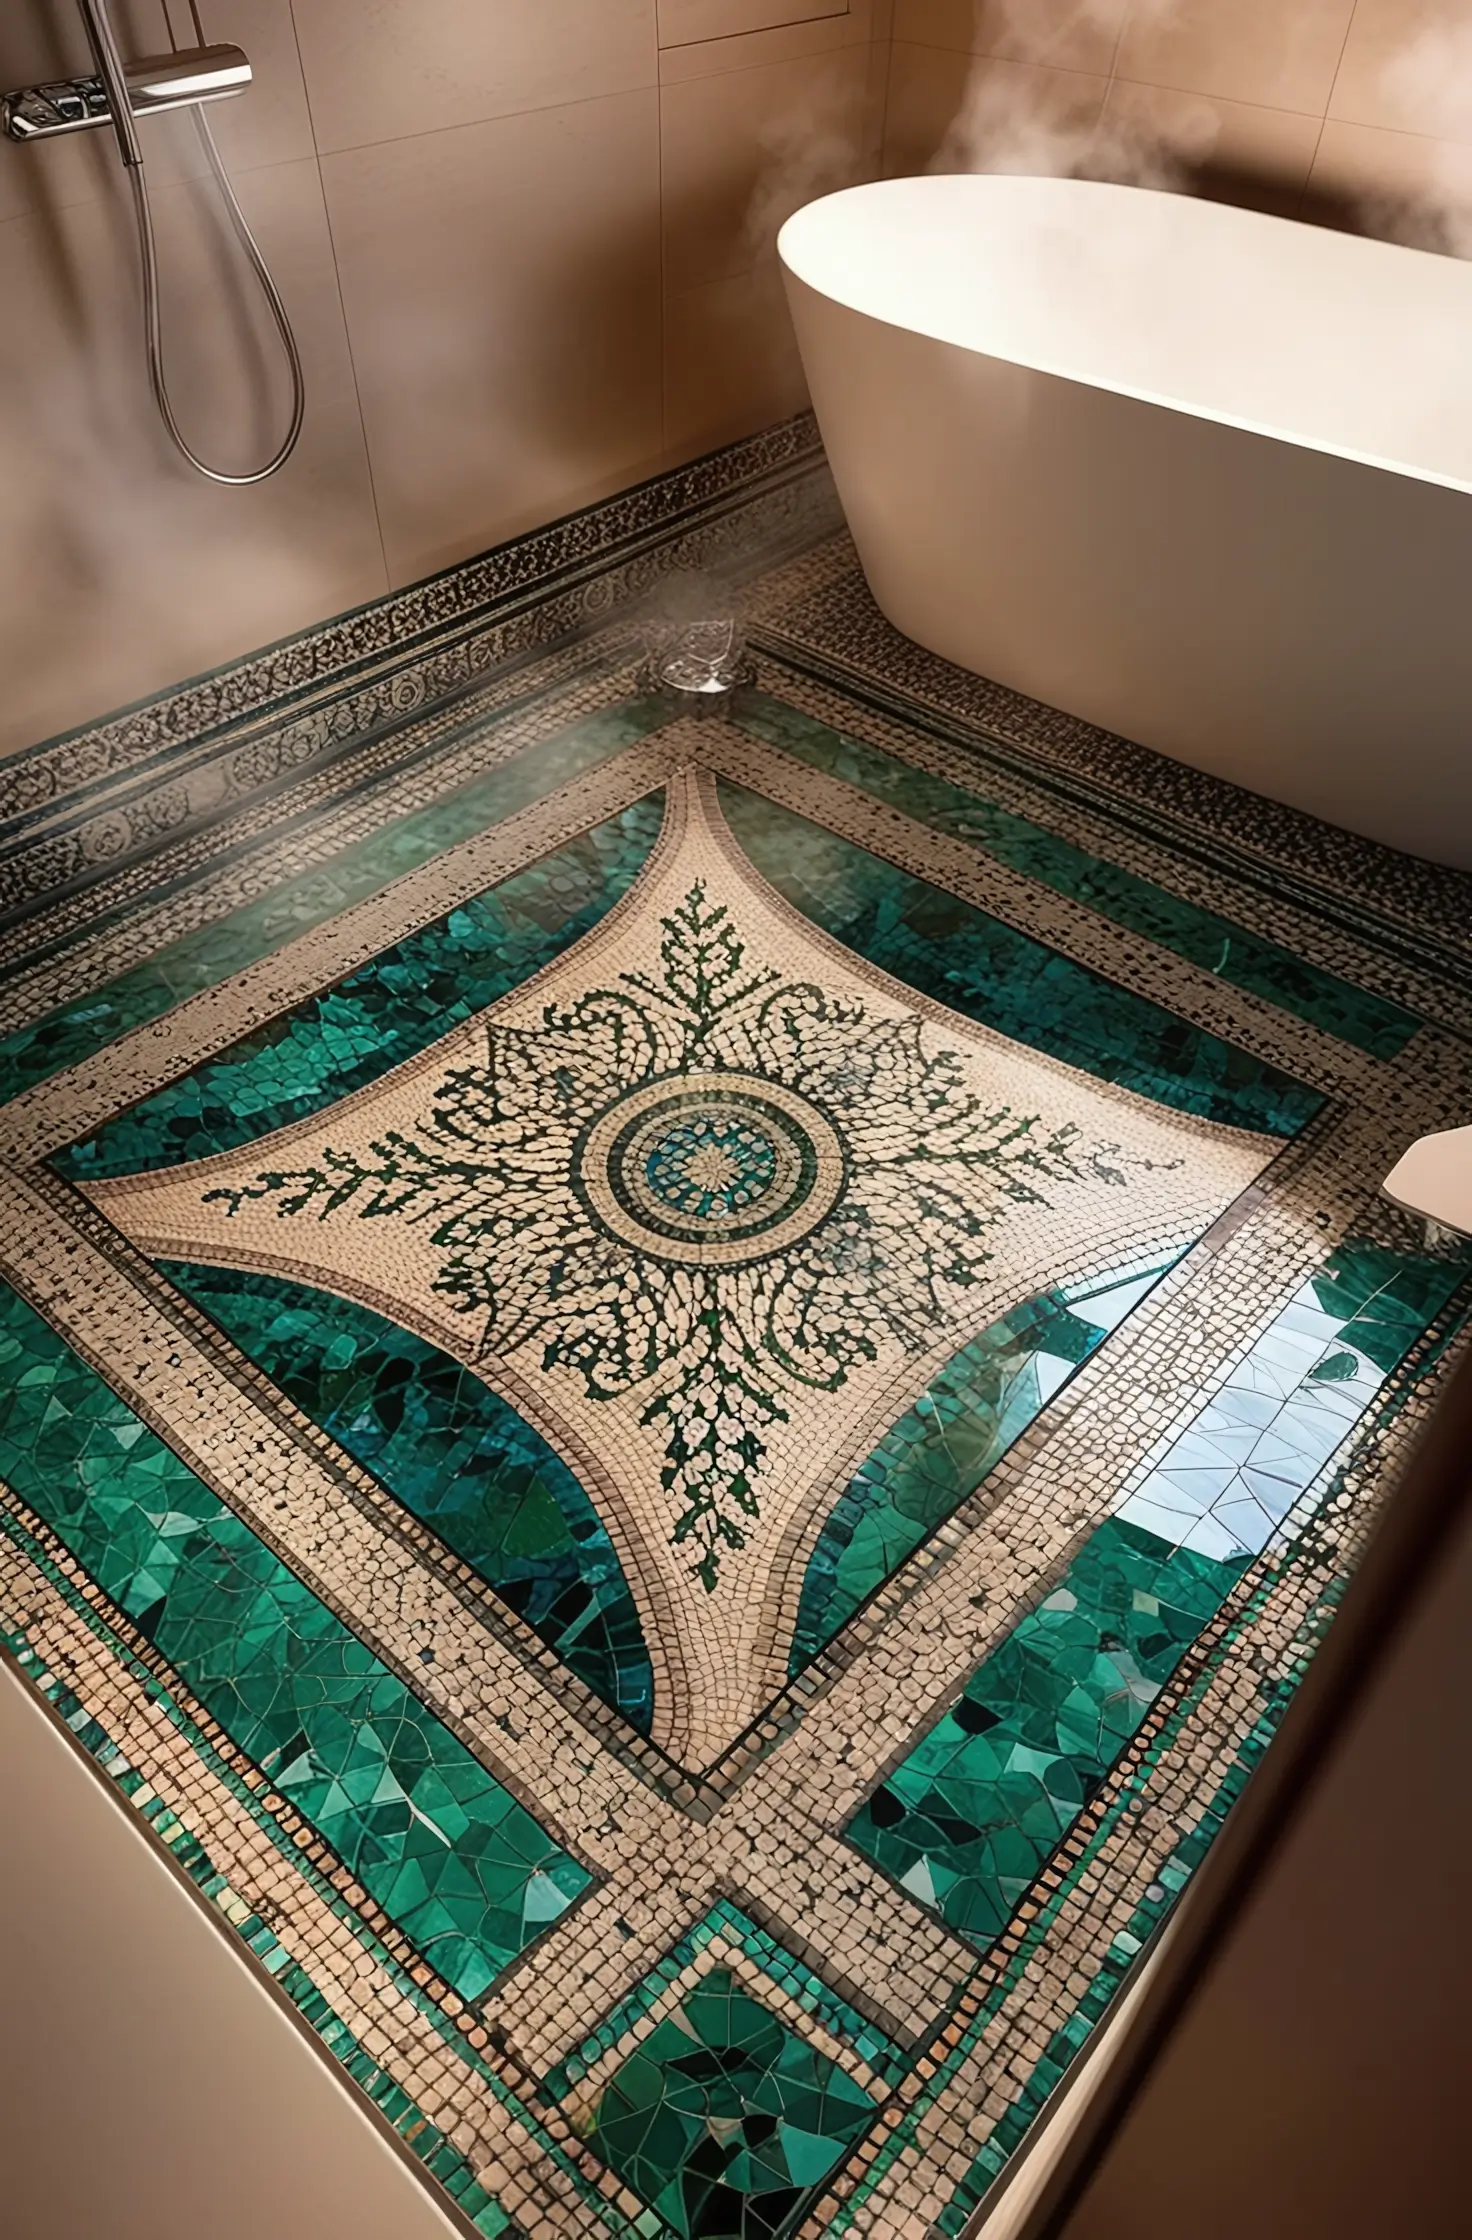 Bathroom with detailed mosaic floor tiles featuring intricate patterns and colors.